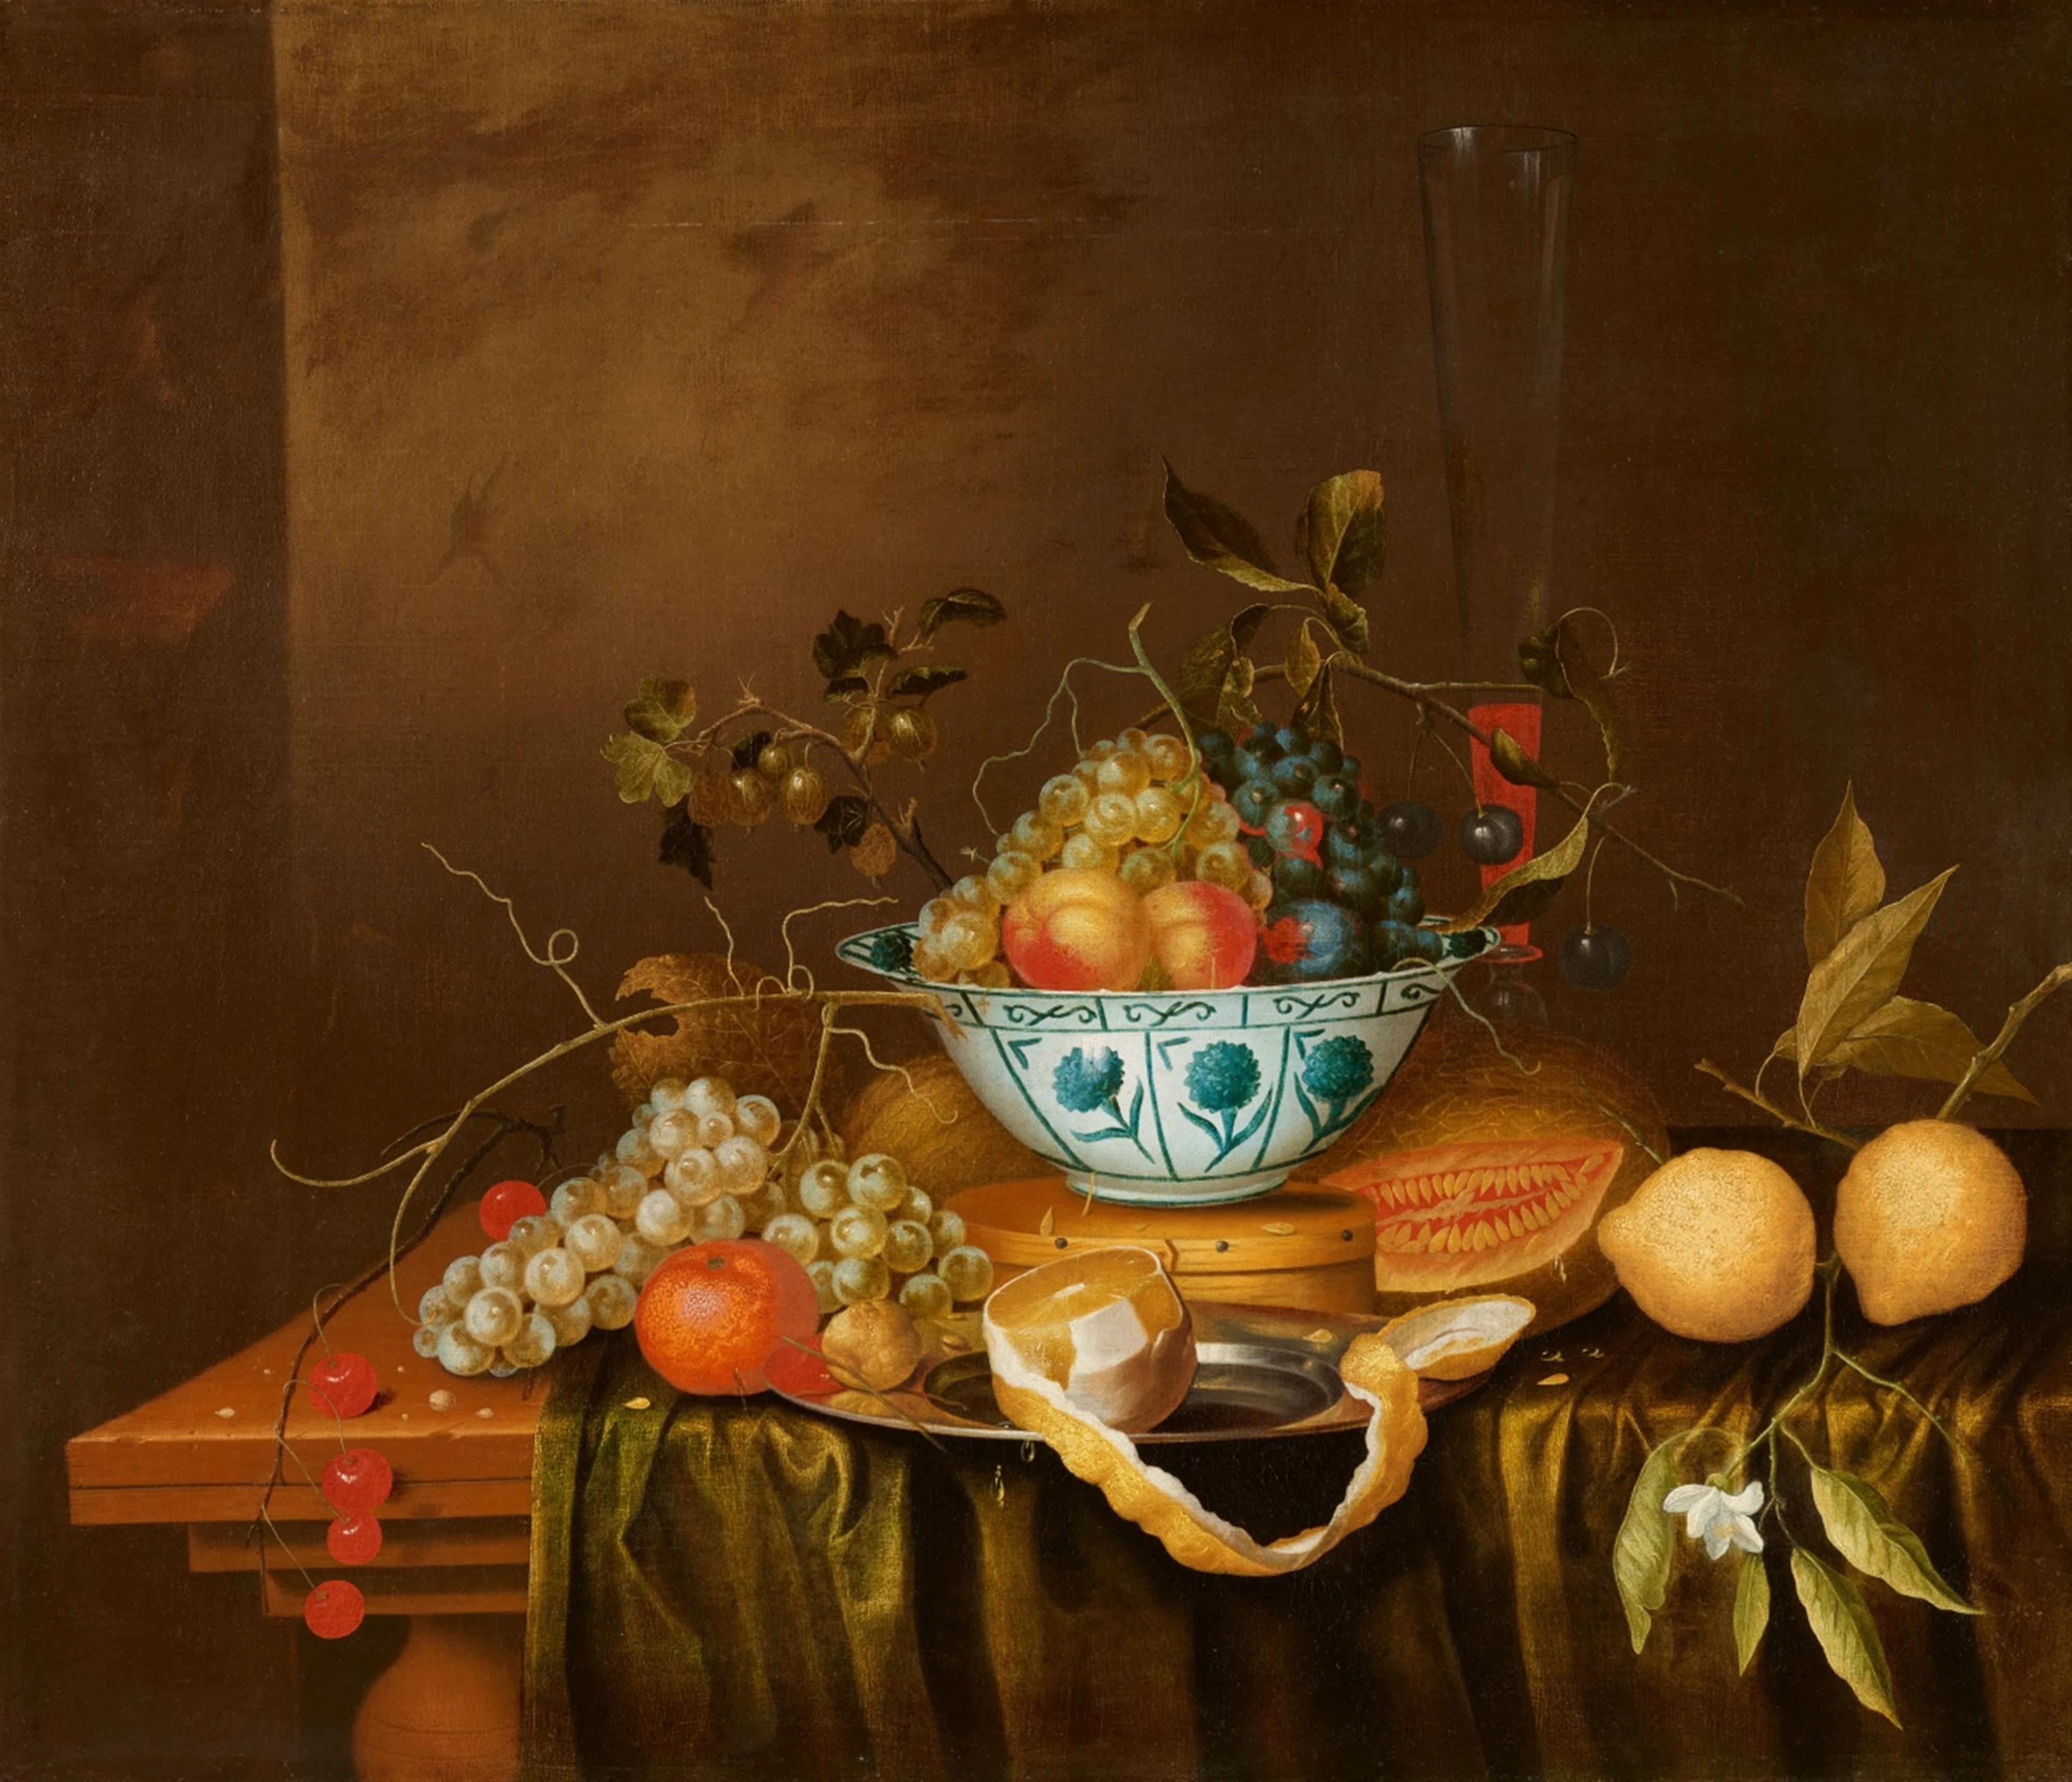 Theodor Aenvanck - Still Life with Fruit in a Wanli Dish on a Box, a Wine Flute, Silver Plates and Fruit scattered on a Table - image-1